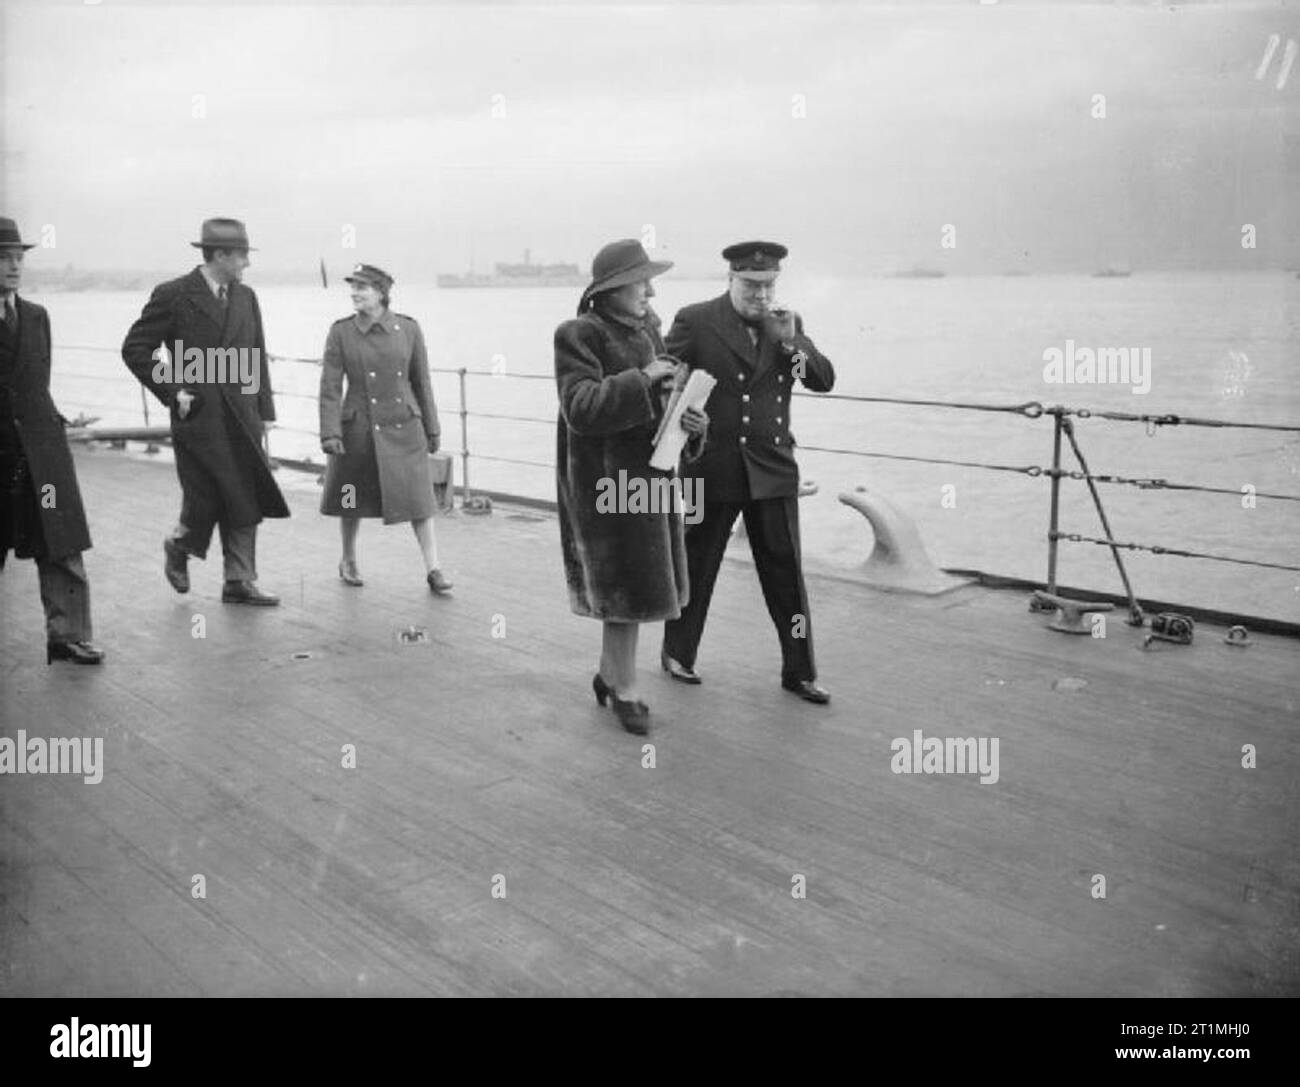 Prime Minister Winston Churchill Aboard HMS Duke of York For Visit To America, December 1941 Prime Minister Winston Churchill walks along the deck of HMS DUKE OF YORK with his secretary Mrs Hill. In the background is Mary Churchill, the PM's daughter and Mr Harriman, the US Ambassador and special representative to the Prime Minister. Stock Photo